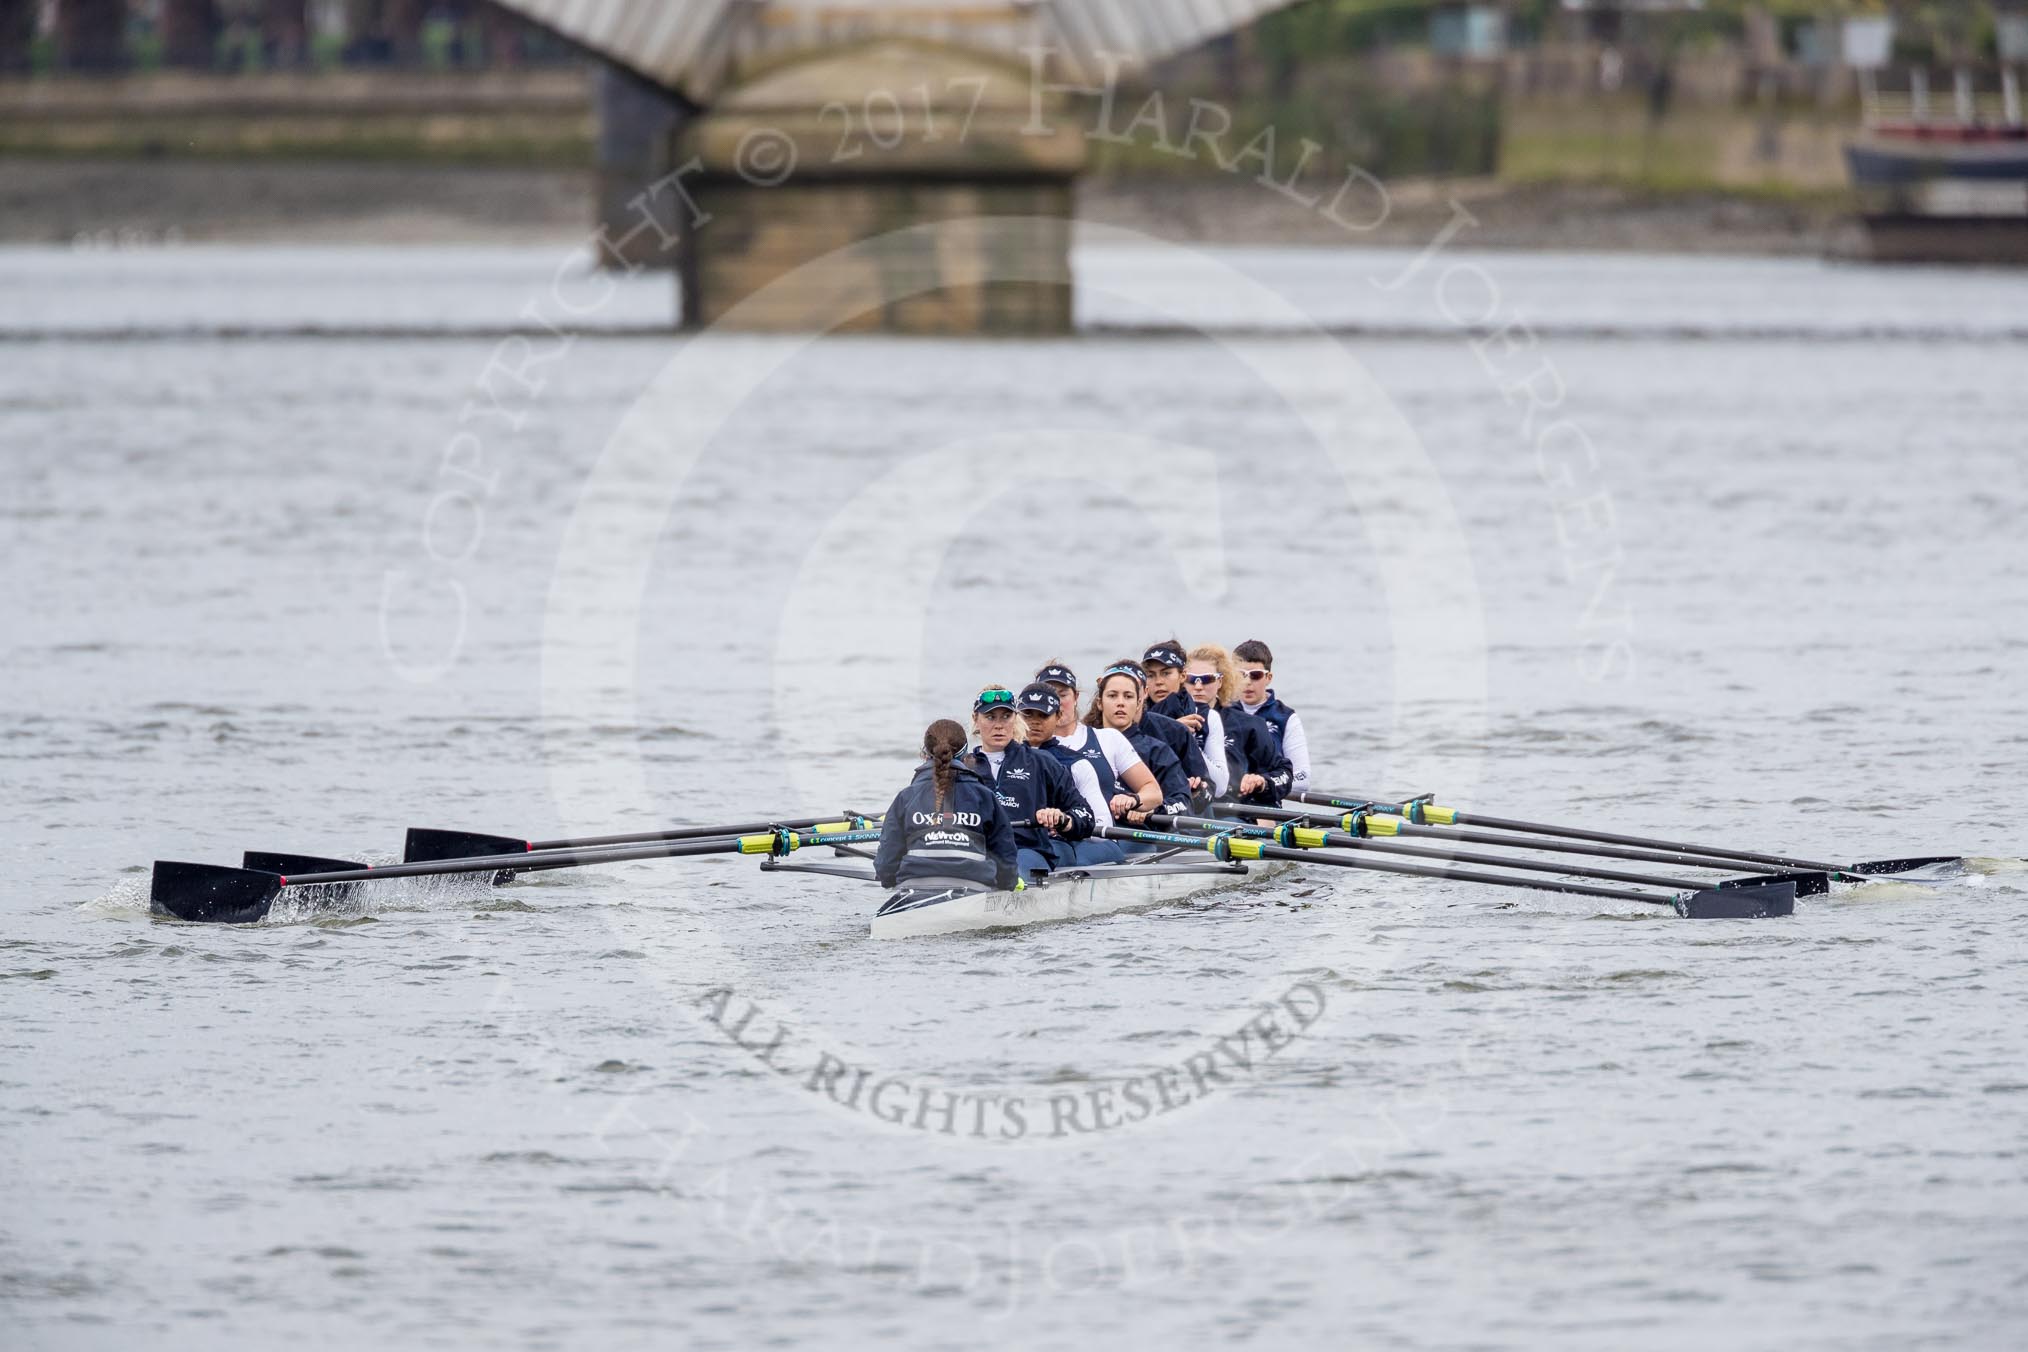 The Cancer Research UK Boat Race season 2017 - Women's Boat Race Fixture OUWBC vs Molesey BC: OUWBC on the way to Putney Bridge before the start of the fixture.
River Thames between Putney Bridge and Mortlake,
London SW15,

United Kingdom,
on 19 March 2017 at 15:22, image #21